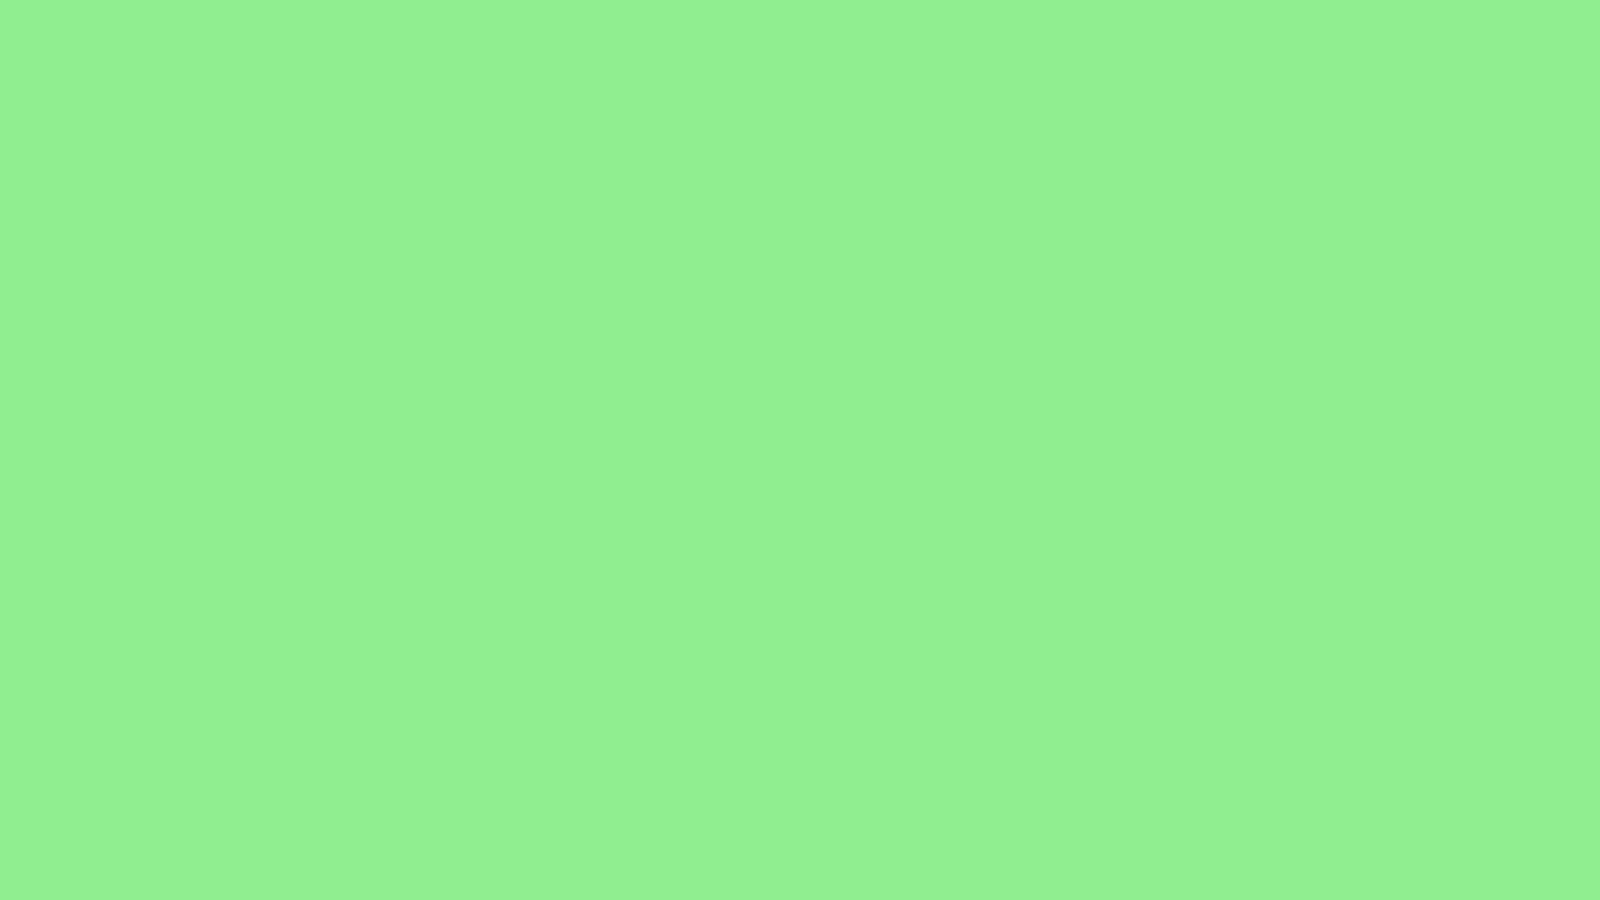 1600x900 Light Green Solid Color Background